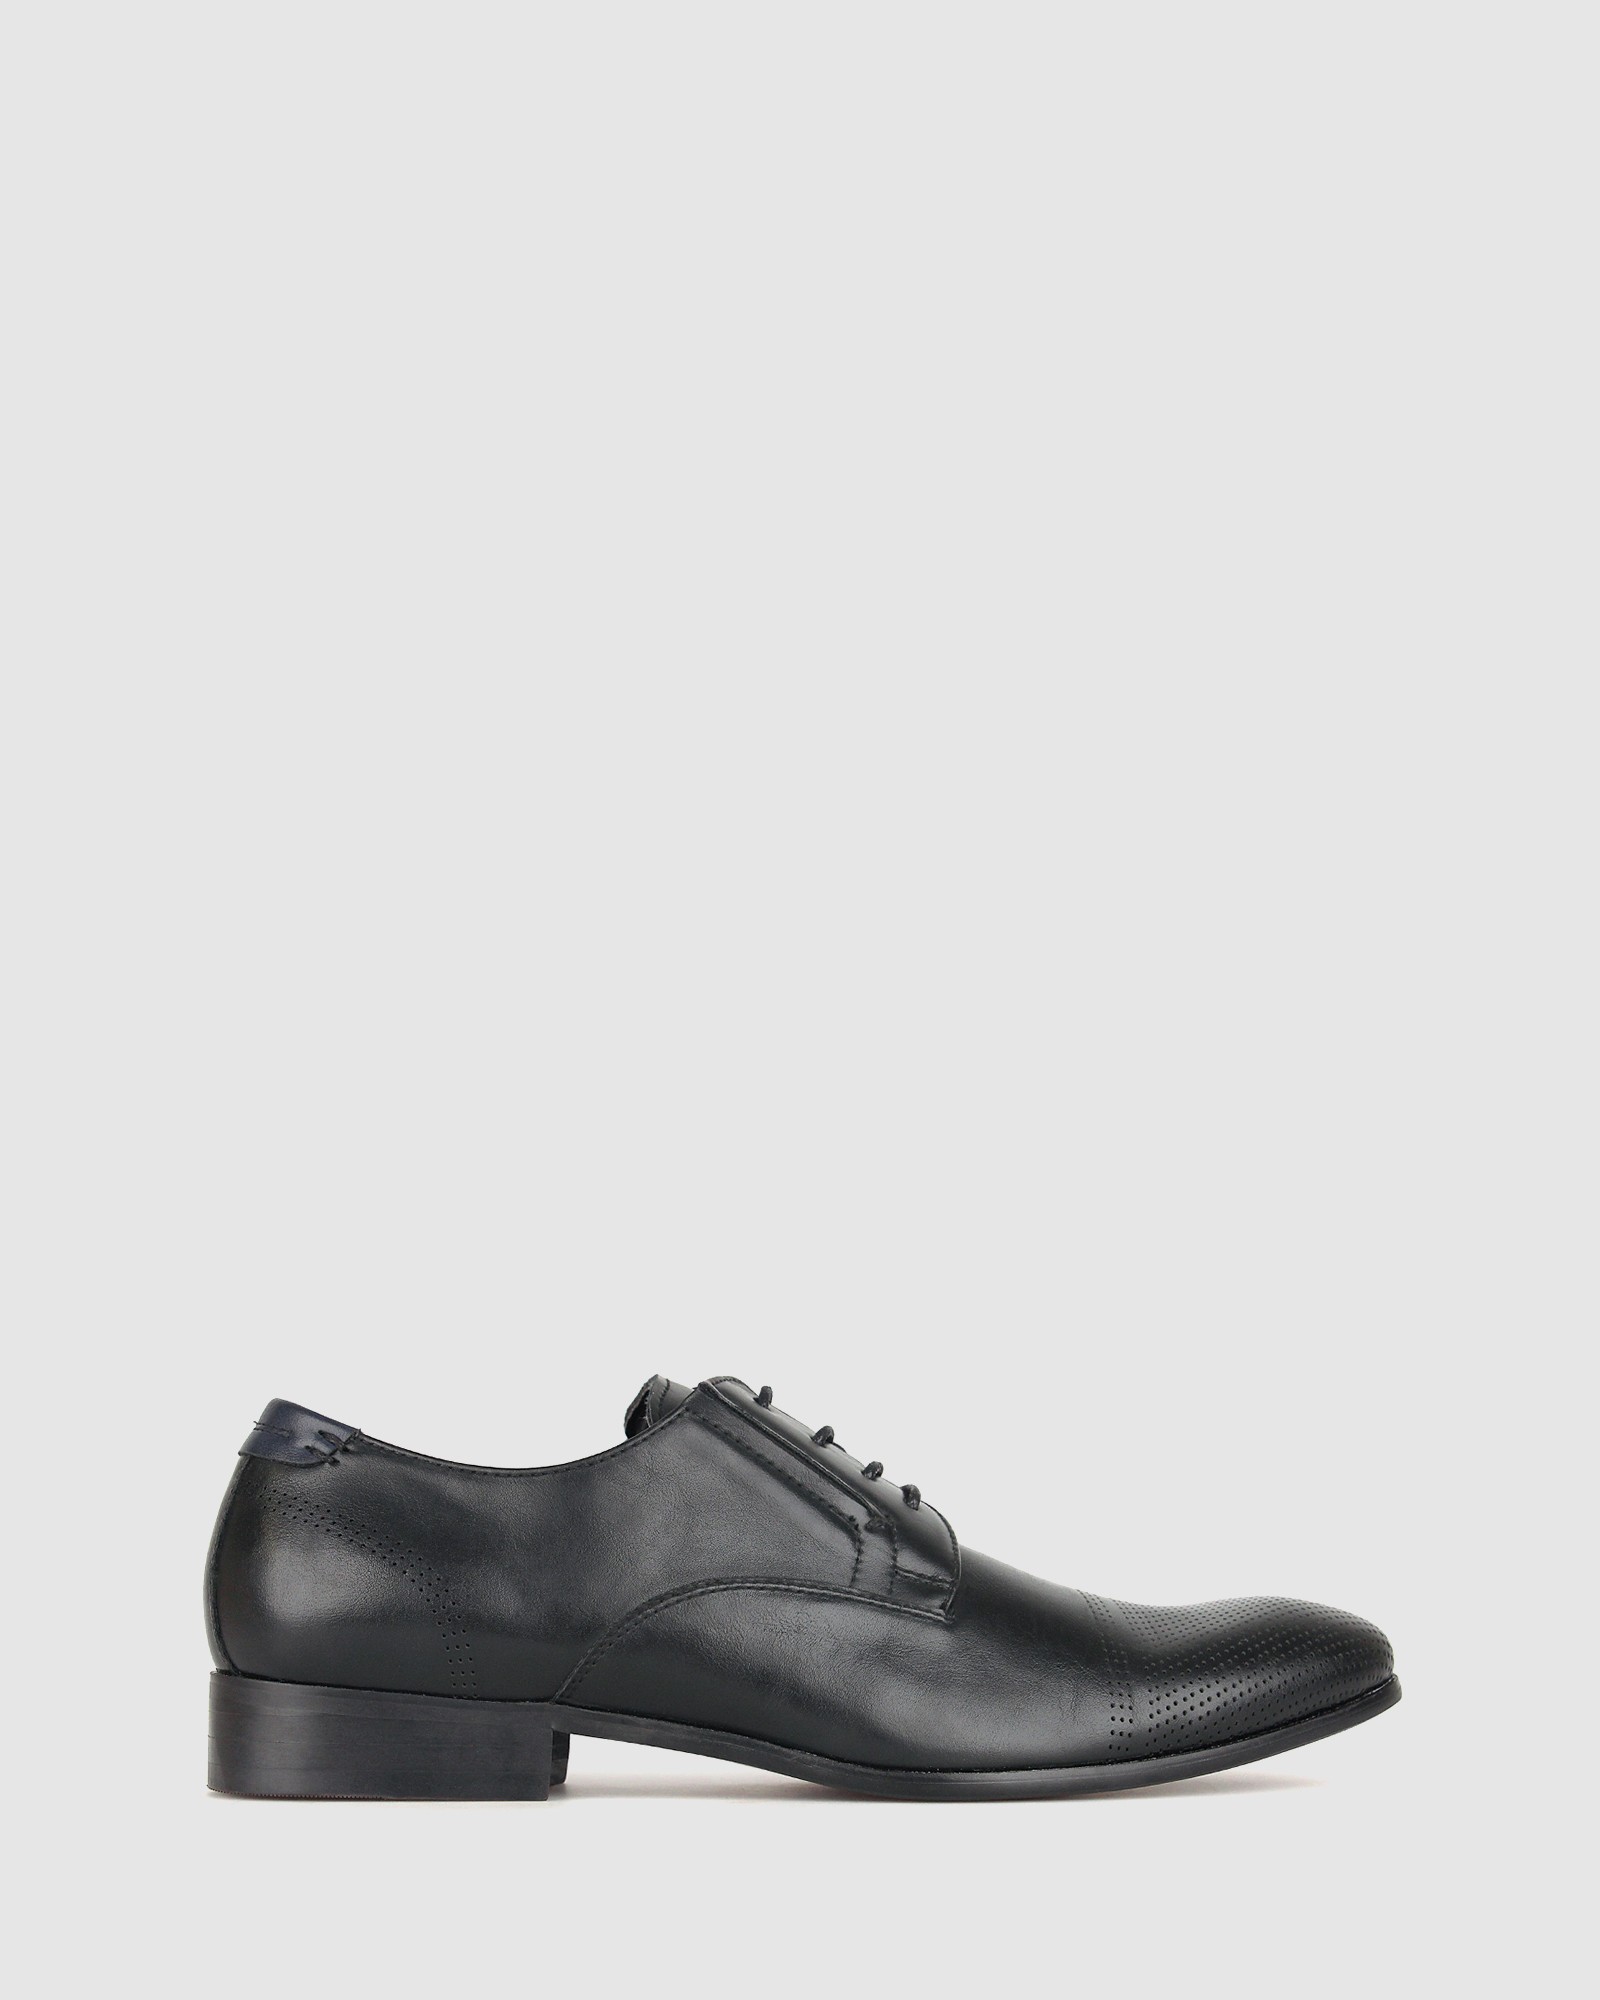 Impact Derby Dress Shoes Black by Betts | ShoeSales